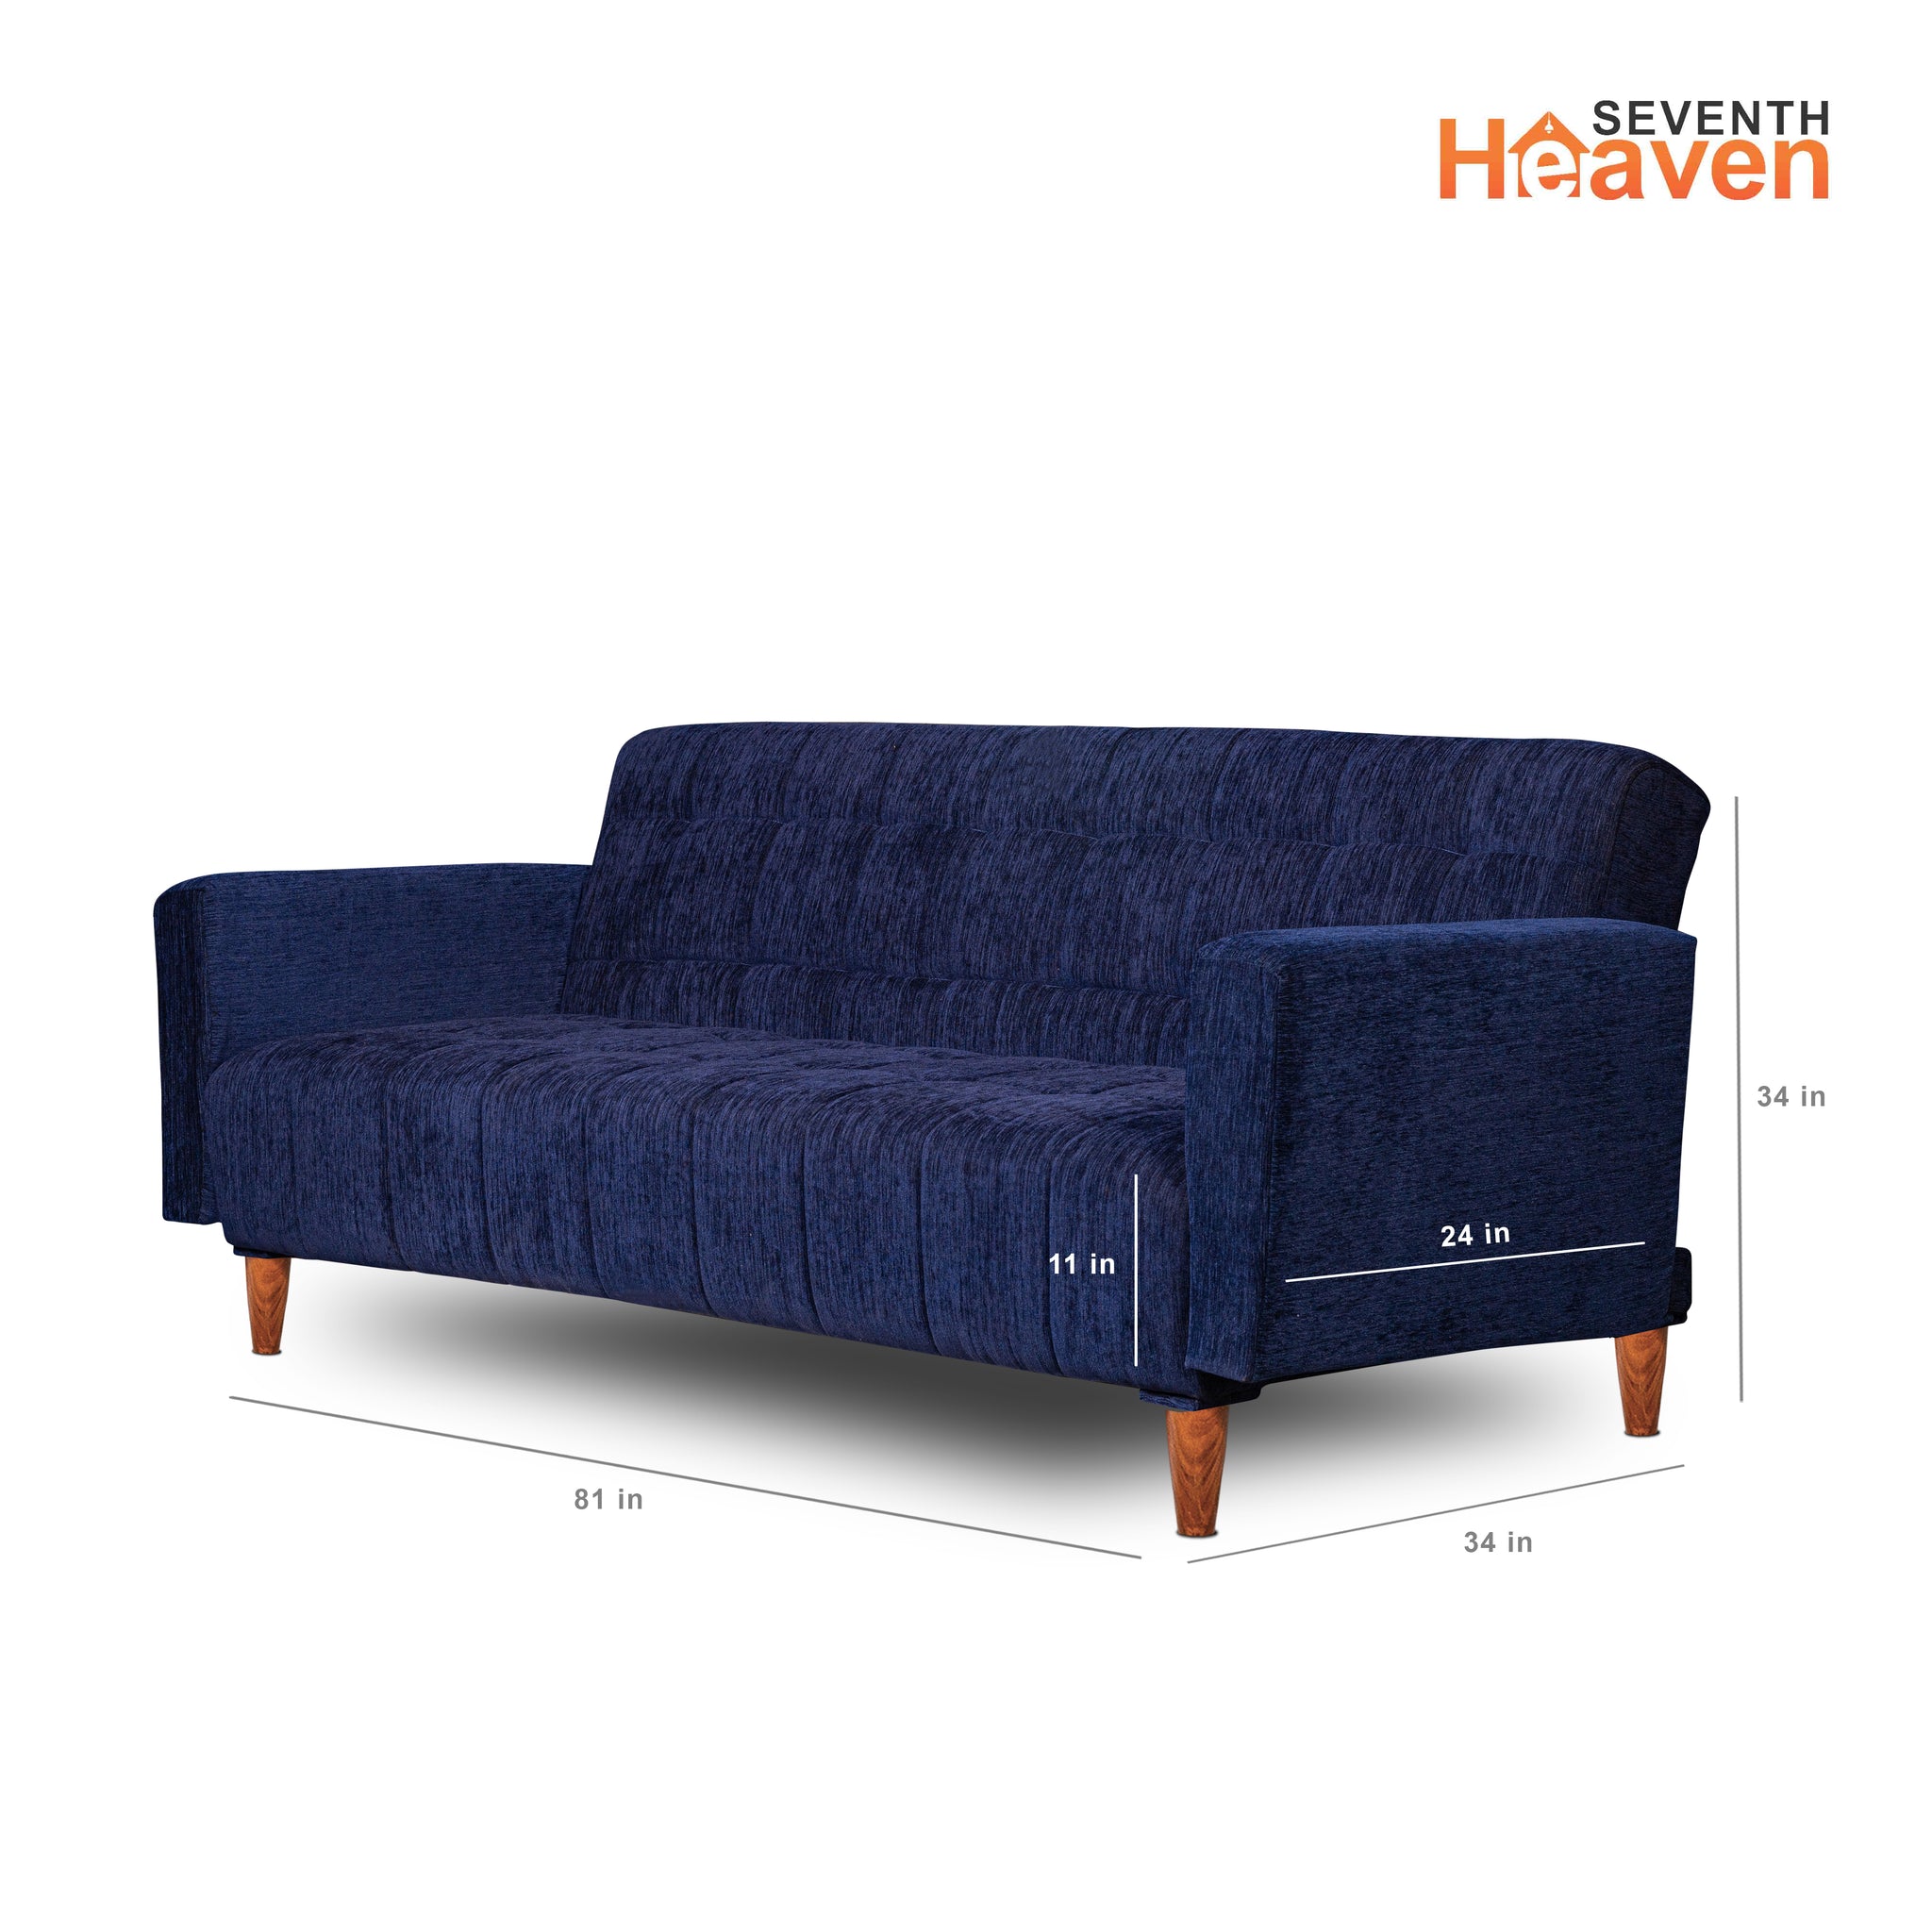 Seventh Heaven Lisbon 4 Seater Wooden Sofa Cum Bed with Armrest. Modern & Elegant Smart Furniture Range for luxurious homes, living rooms and offices. Use as a sofa, lounger or bed with removable armrest. Perfect for guests. Molphino fabric with sheesham polished wooden legs. Blue colour.